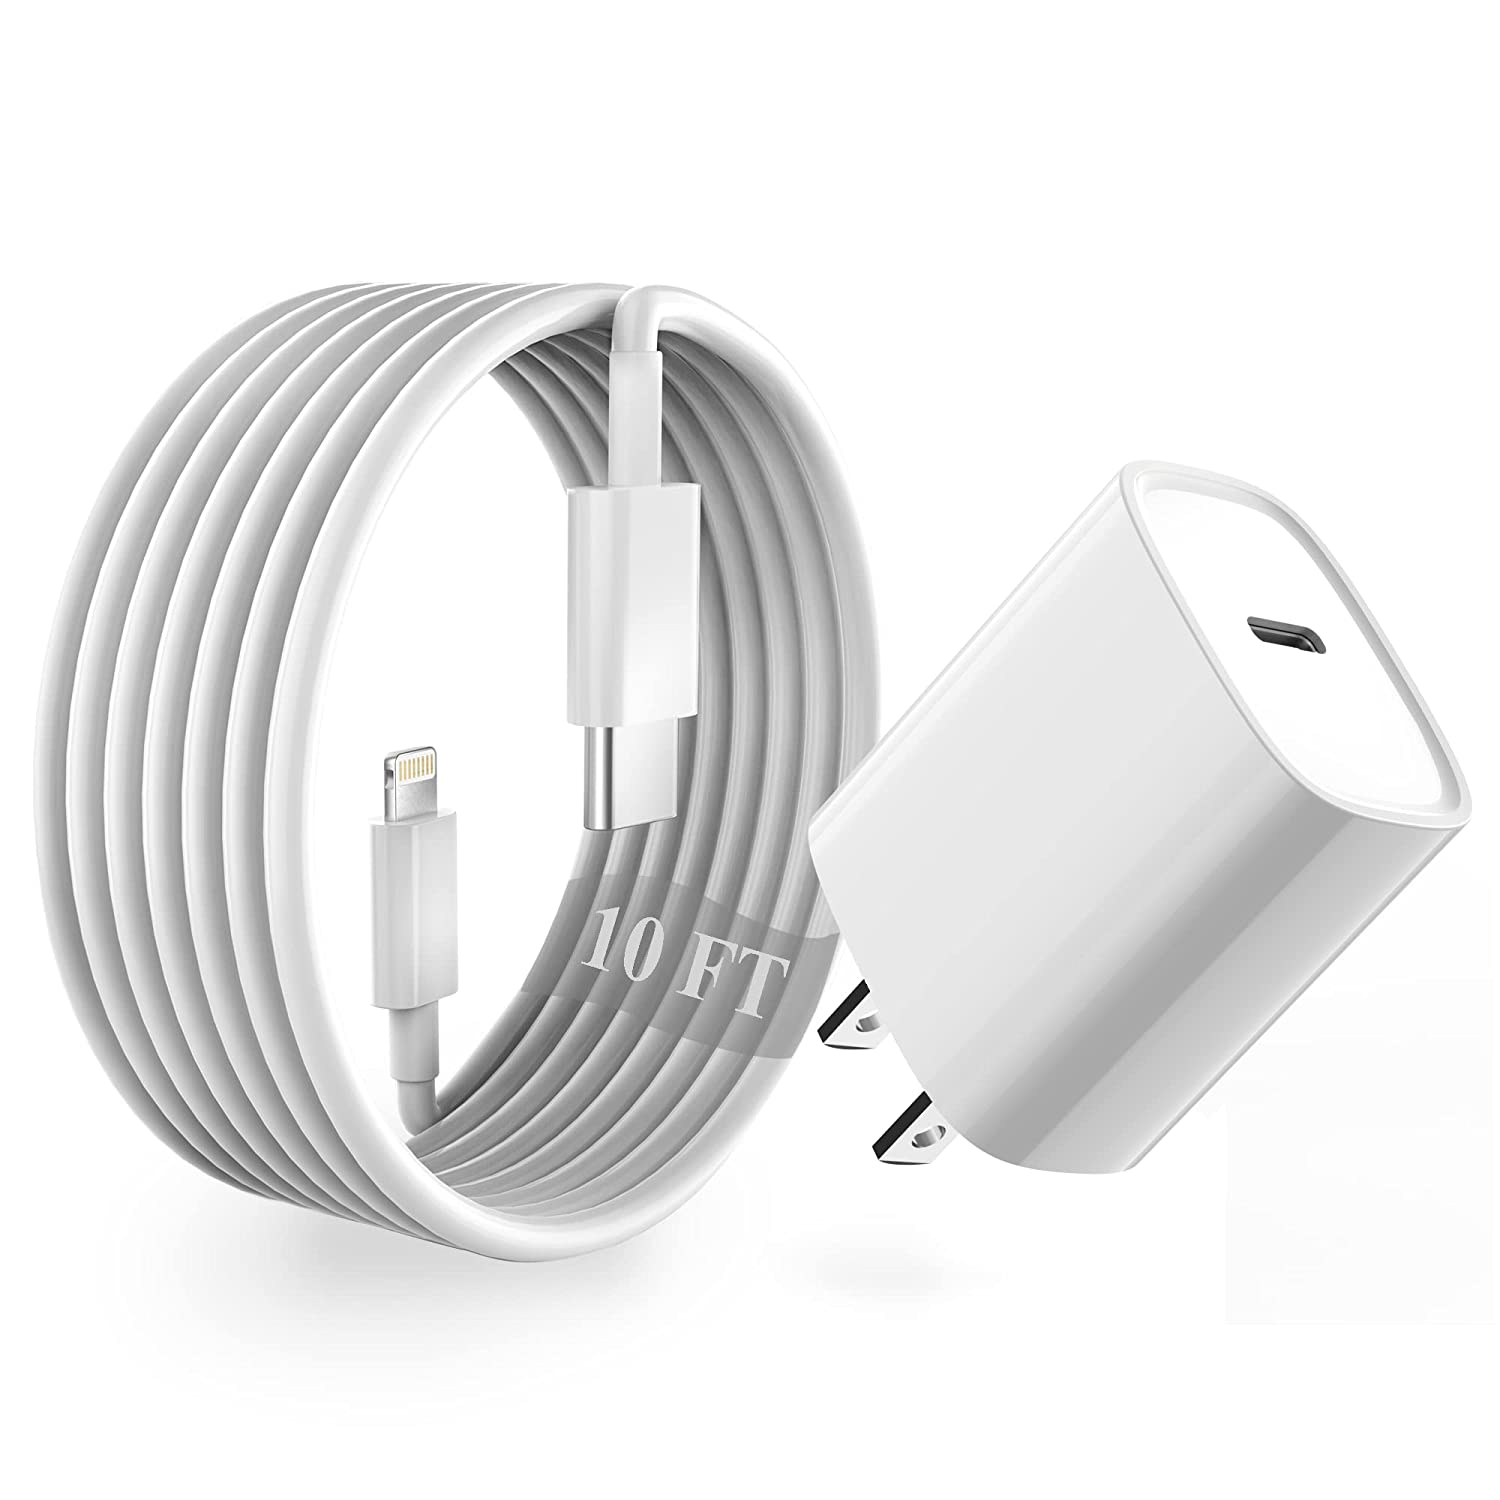 10 FT iPhone Charger Fast Charging,【Apple MFi Certified】Long iPhone 13